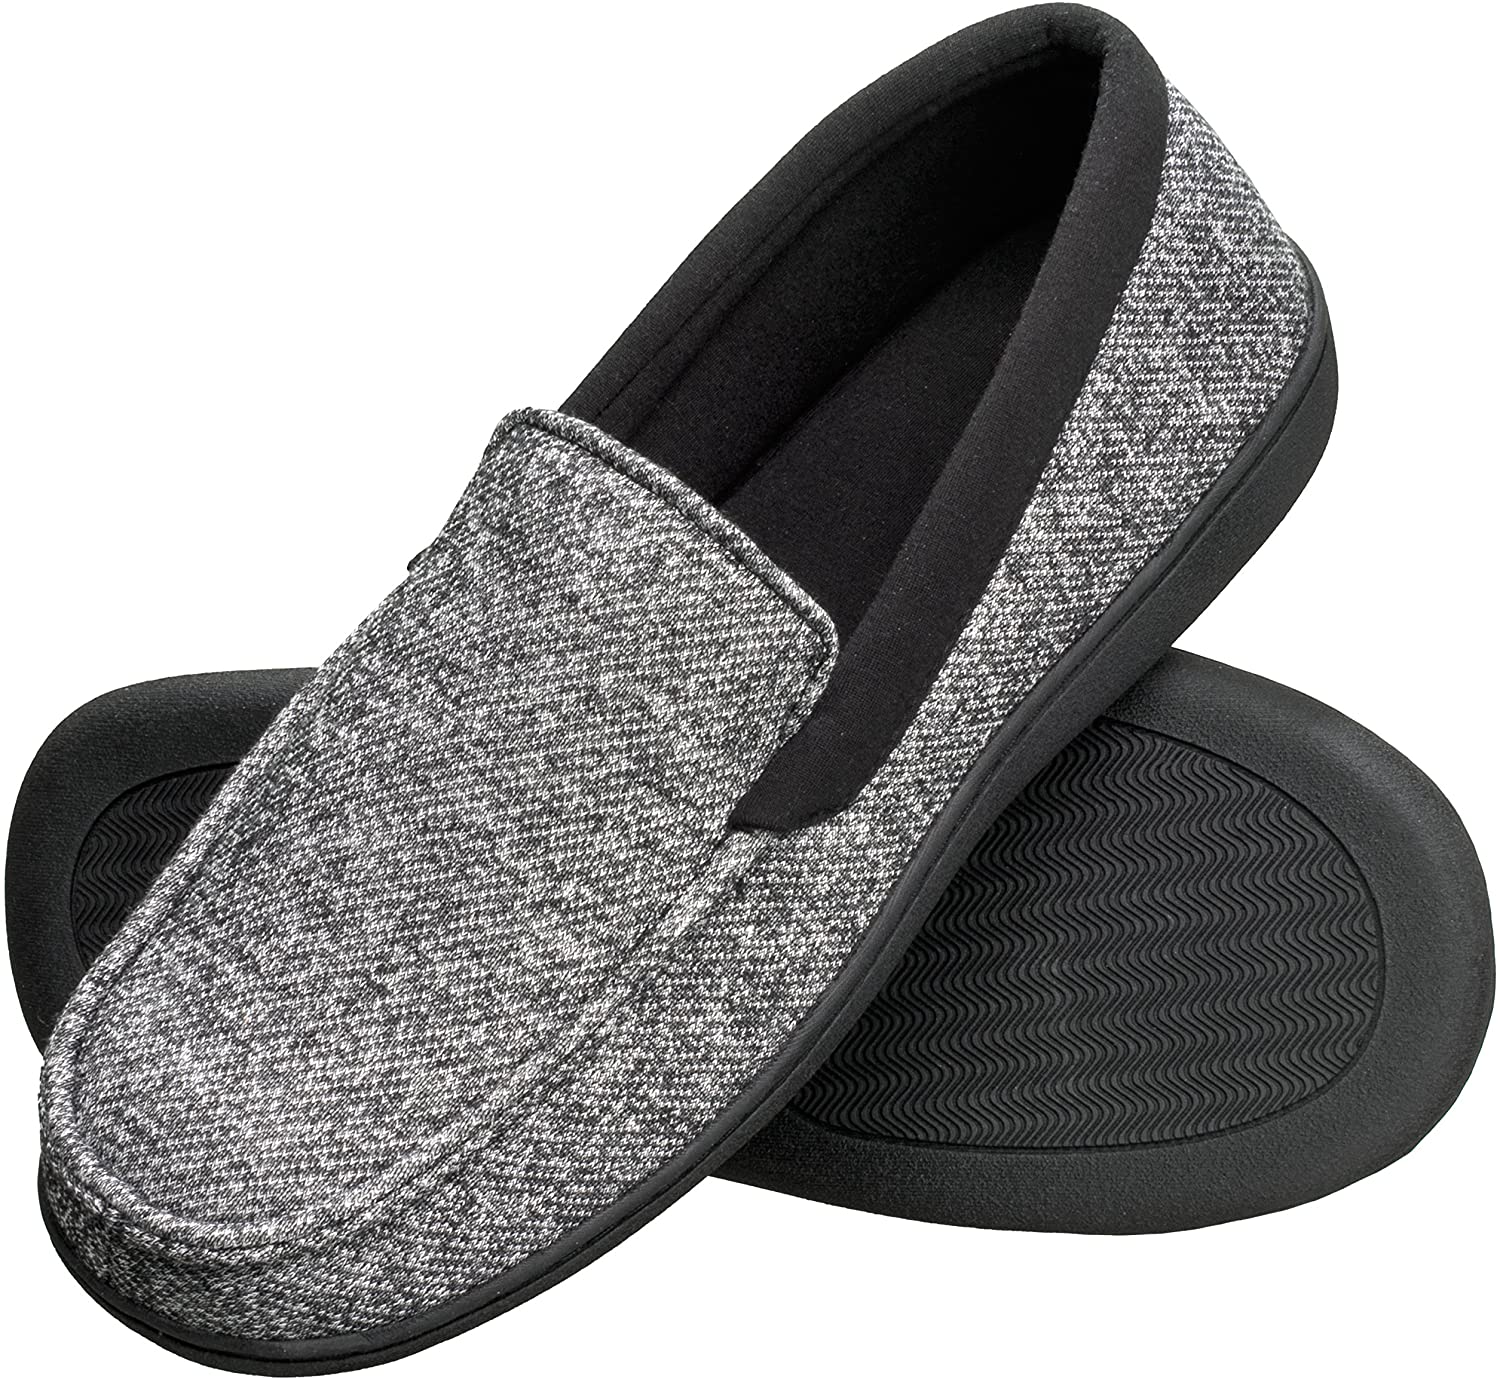 Hanes Boys Slipper Moccasin House Shoe with Indoor Outdoor Memory Foam Sole Fresh Iq Odor Protection Slipper 